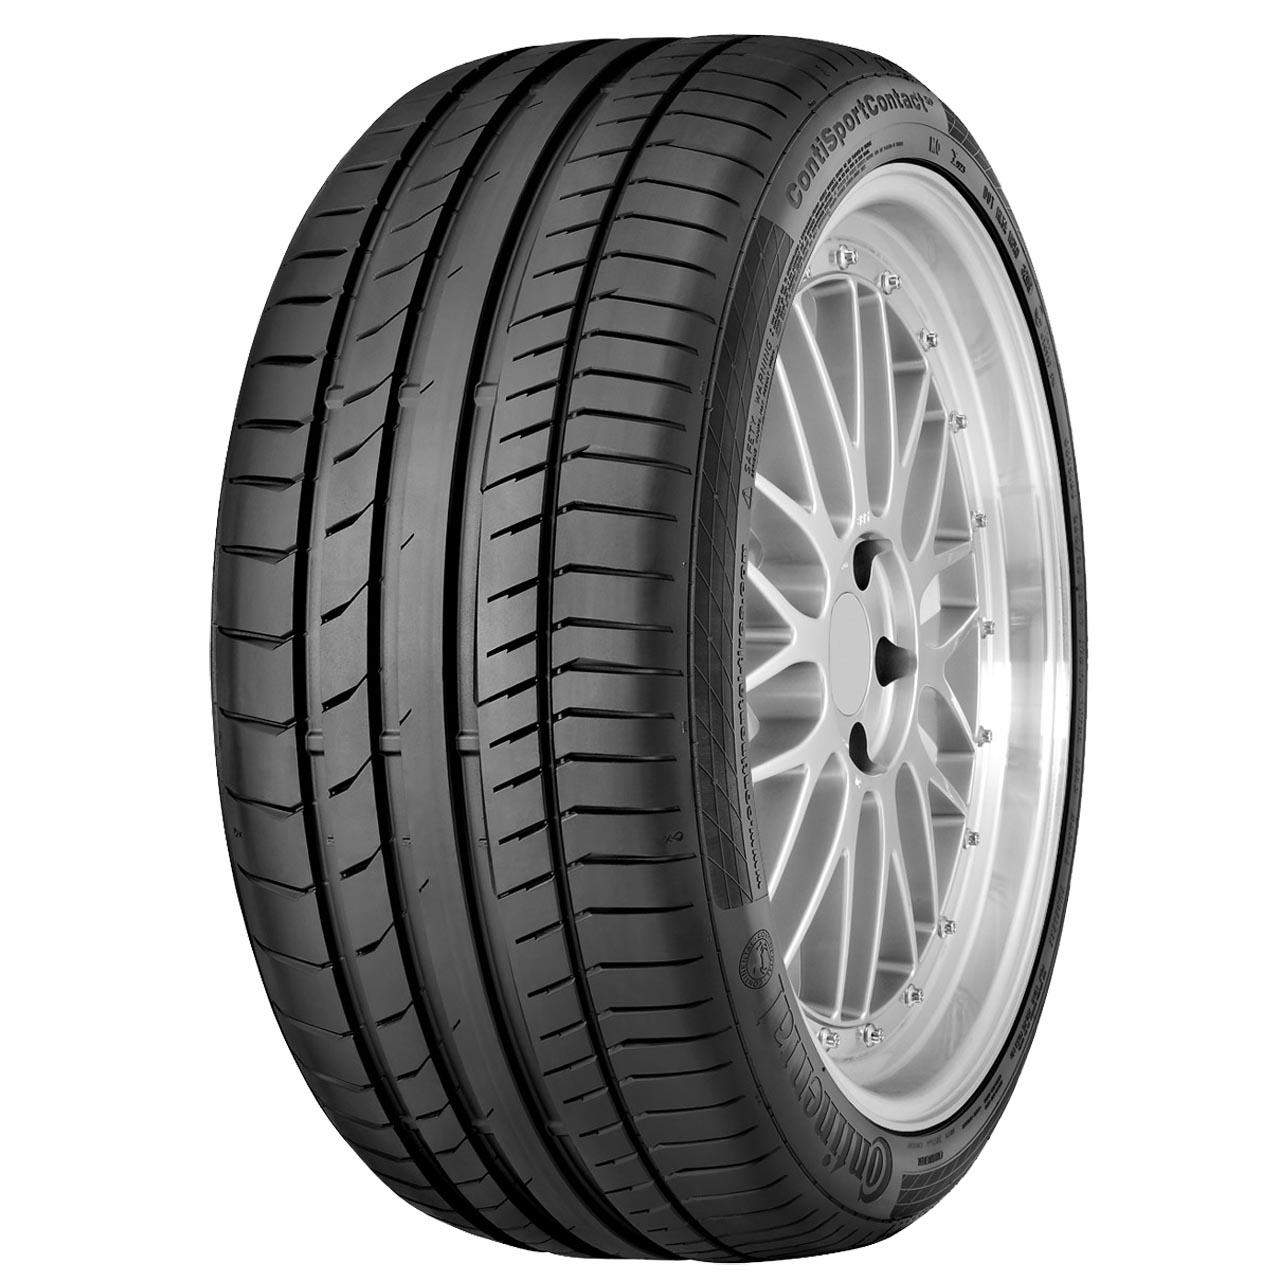 Continental CONTISPORTCONTACT 5P 265/30R21 96Y XL RO1 SIL